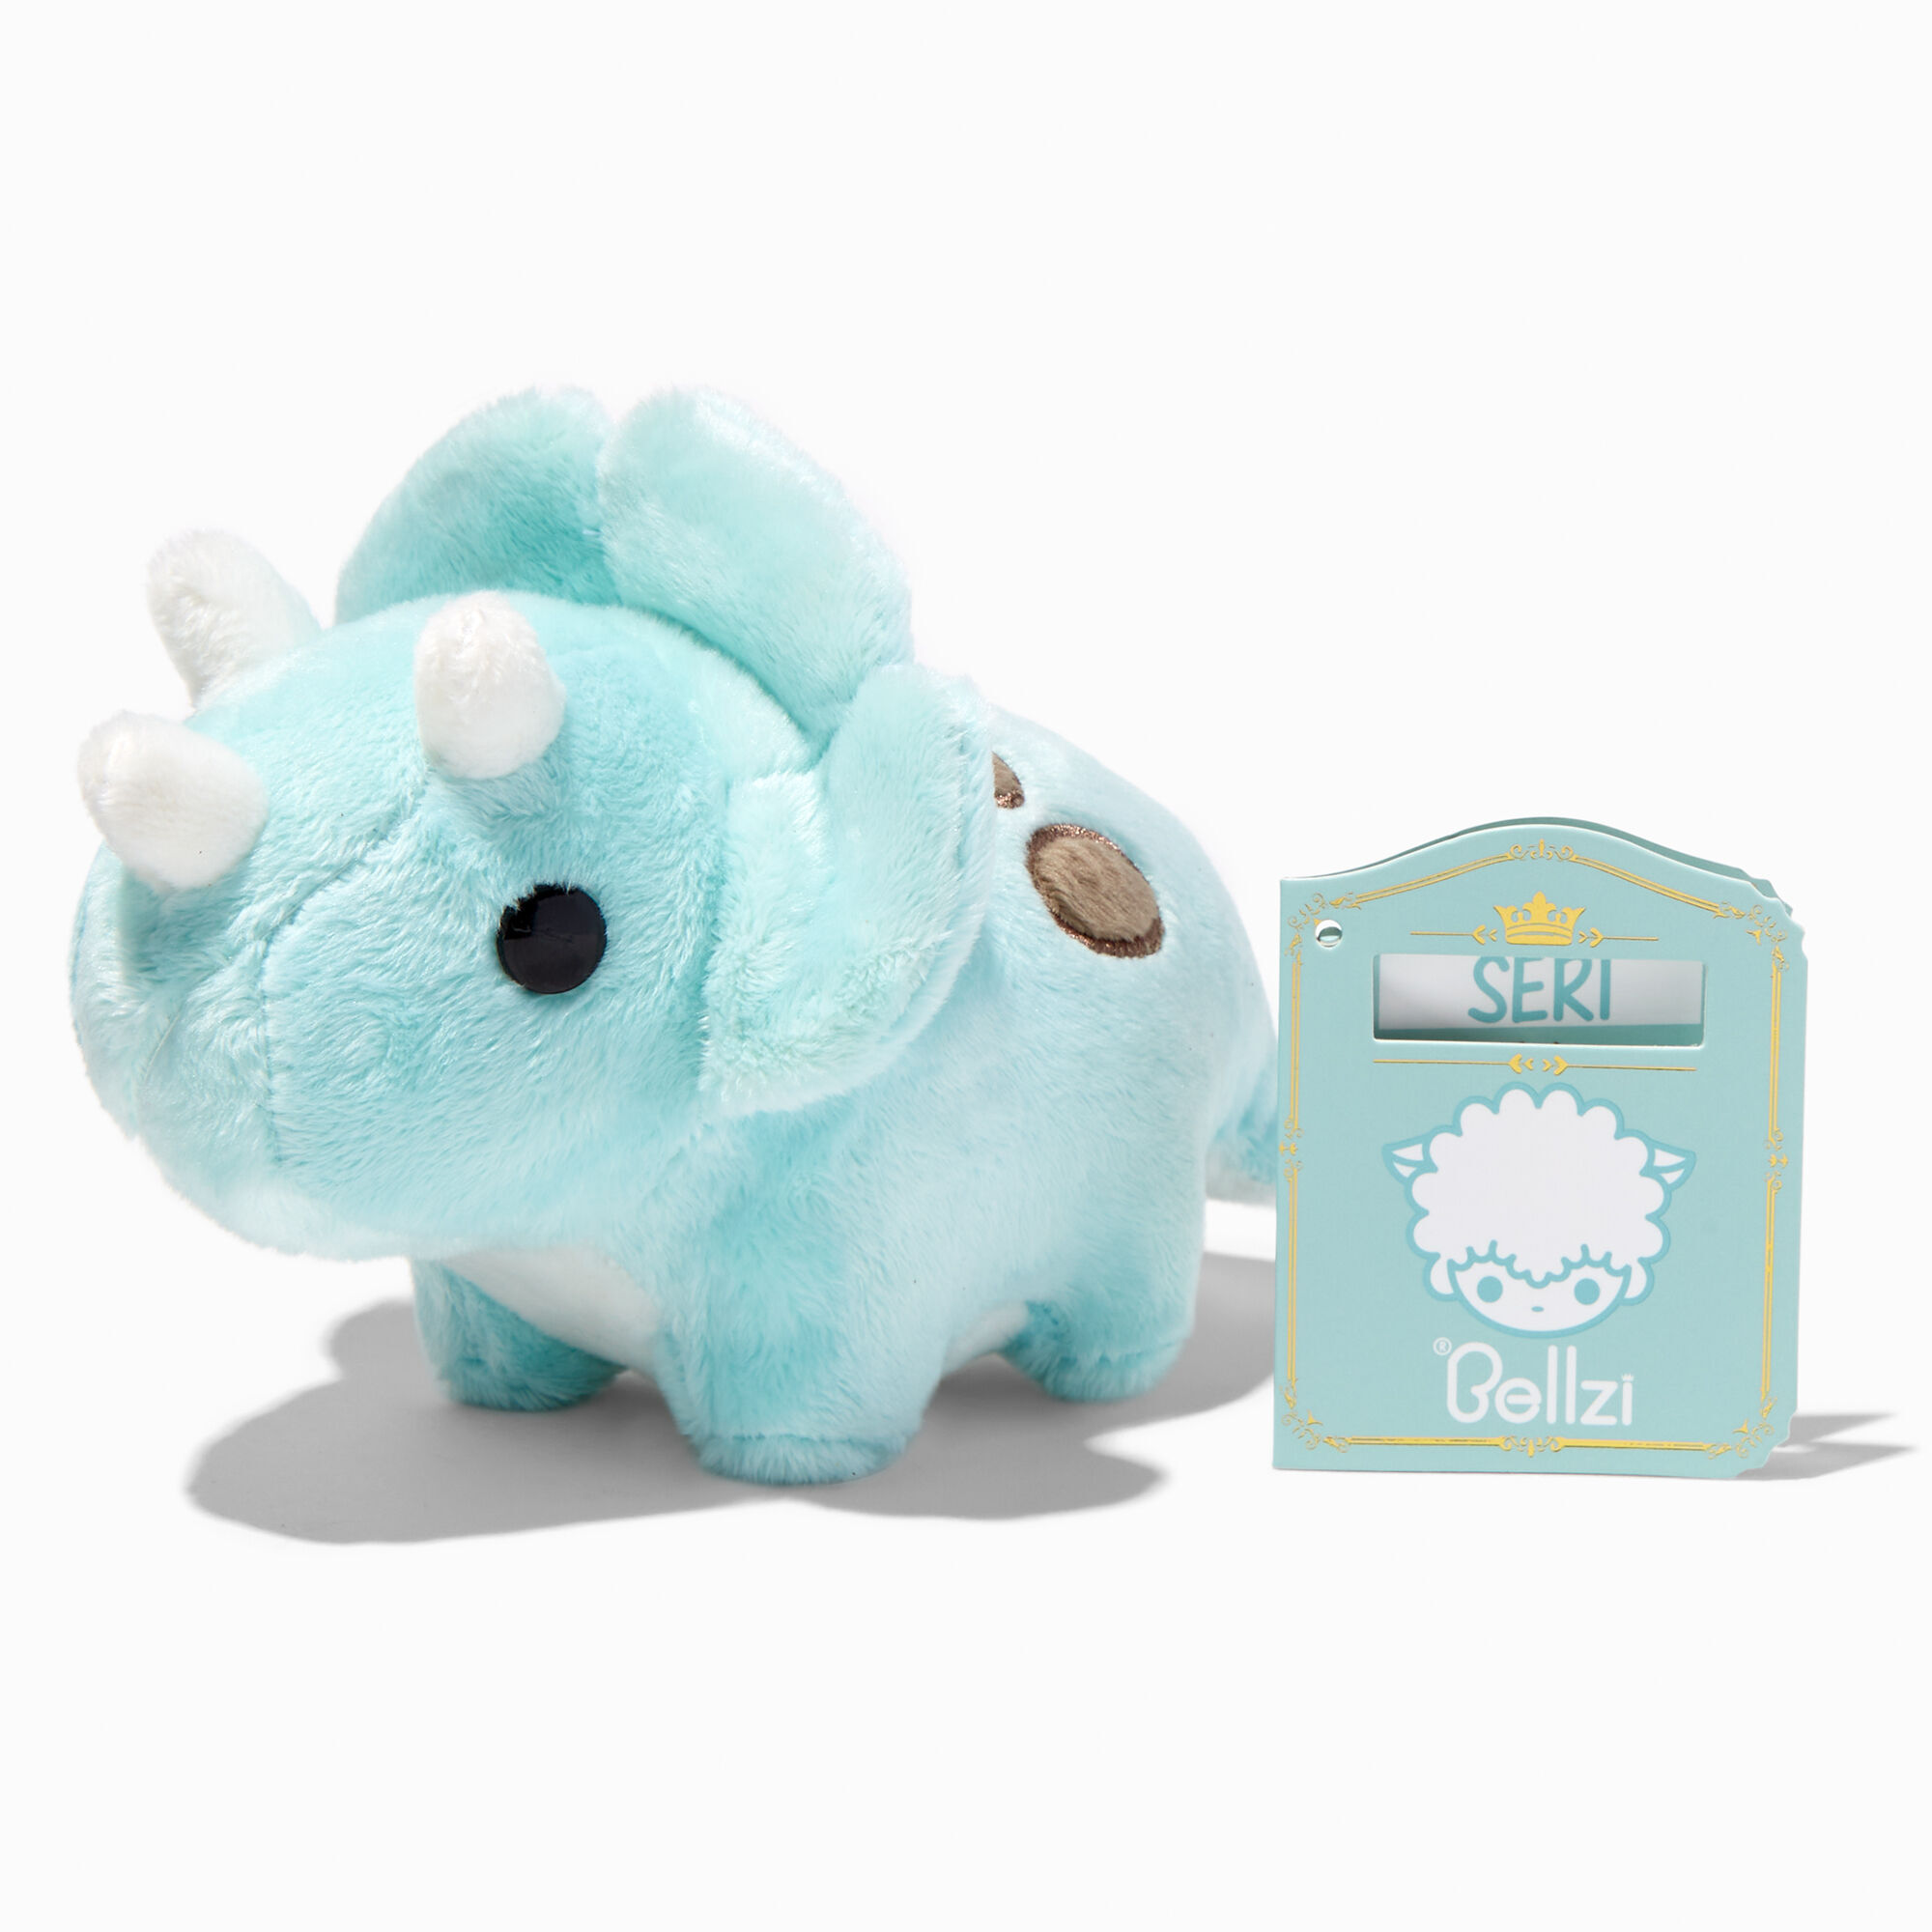 View Claires Bellzi 5 Seri The Triceratops Soft Toy information